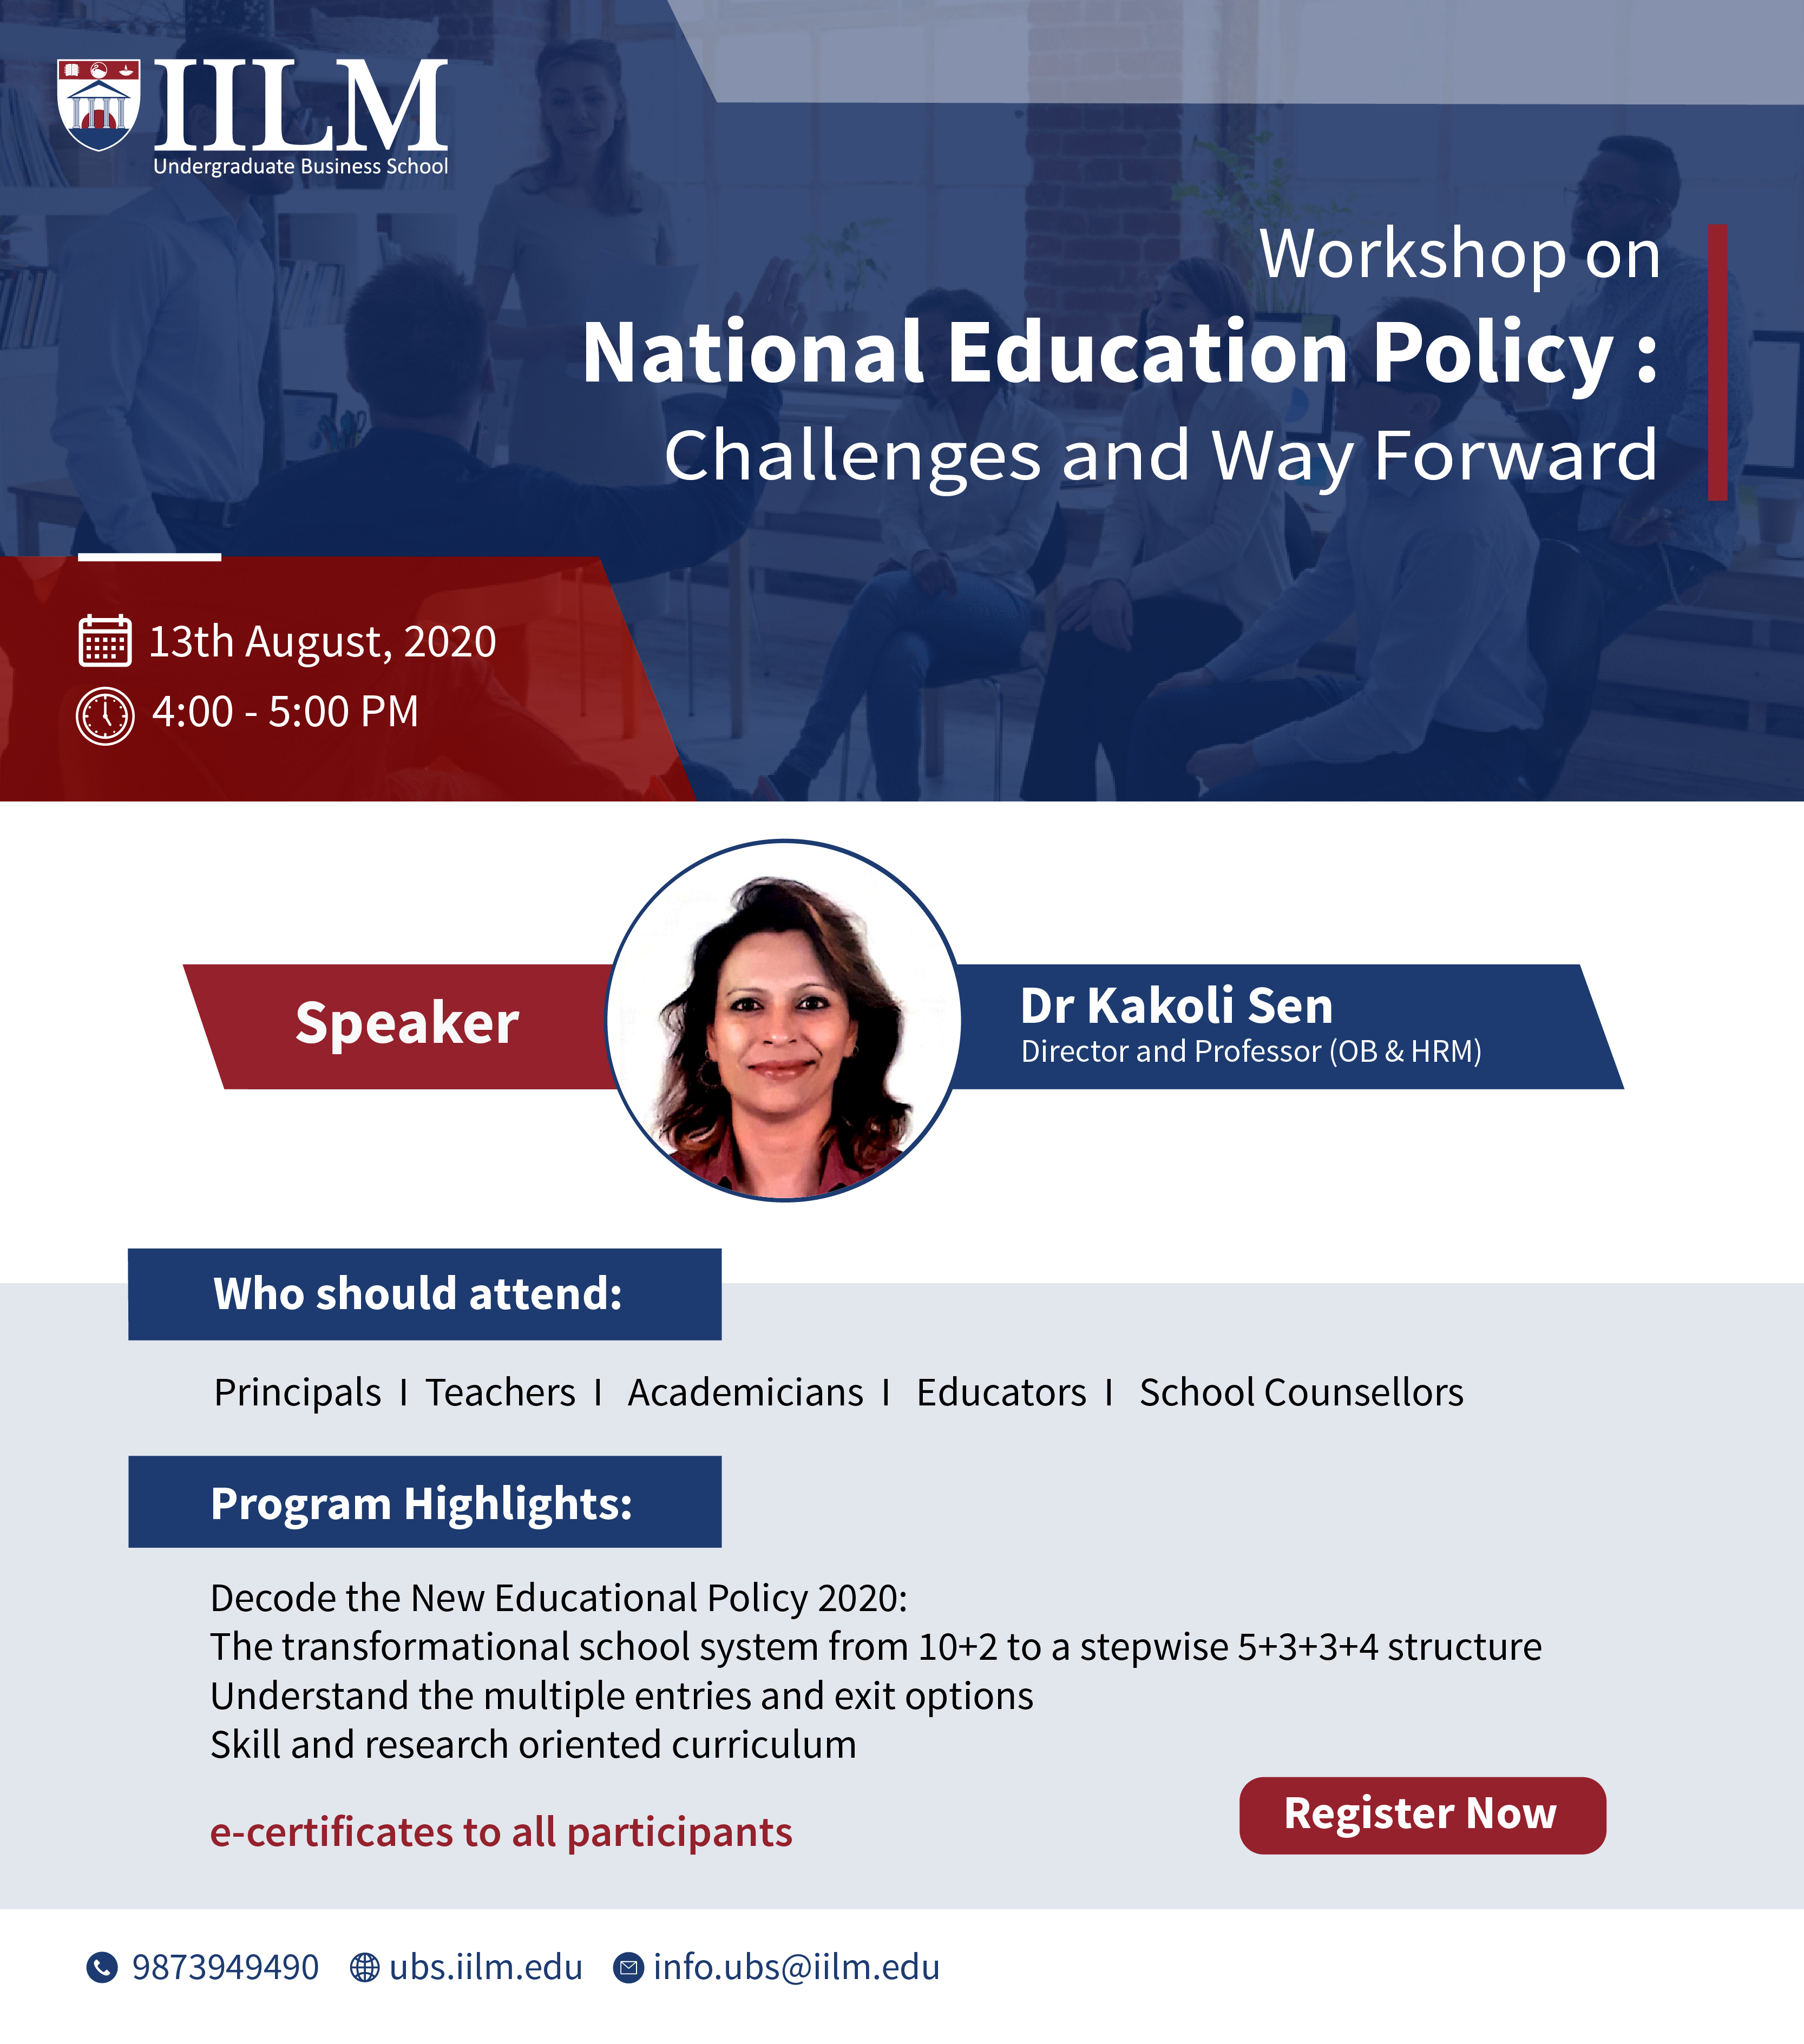 Workshop on National Education Policy: Challenges and Way Forward